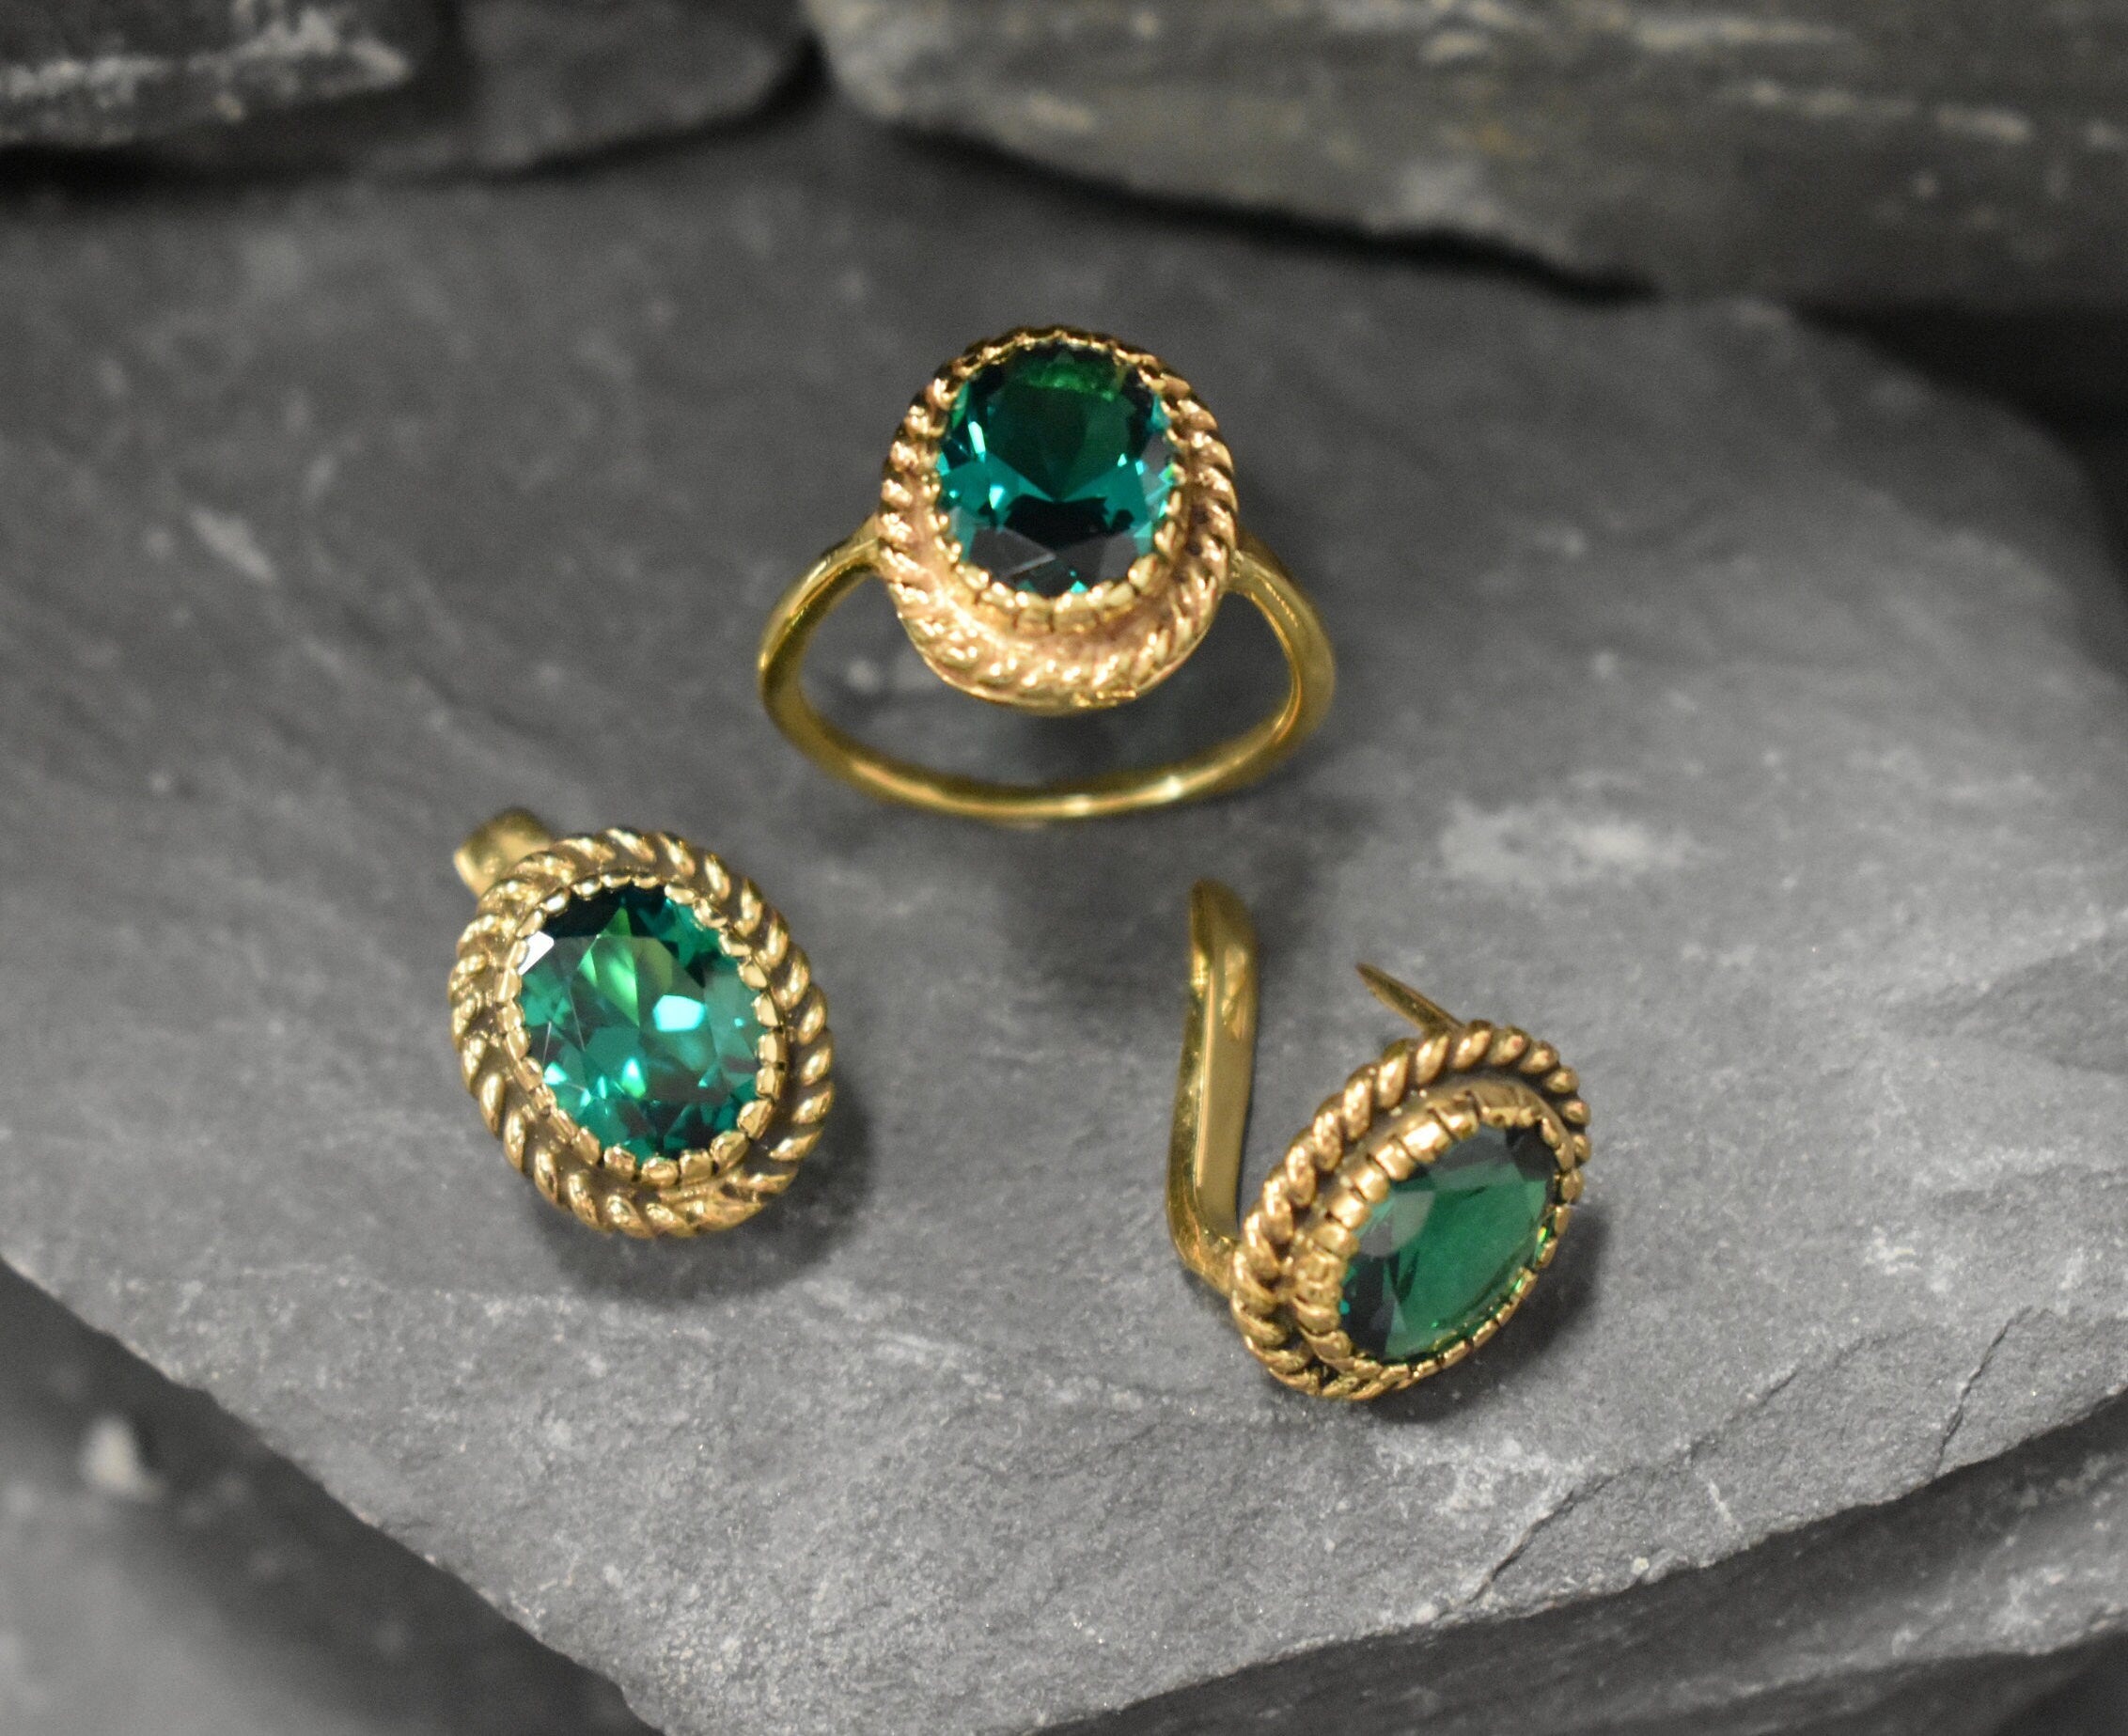 Gold Emerald Ring, Created Emerald, Antique Ring, Gold Plated Ring, Green Vintage Ring, Oval Ring, Gold Vermeil Ring, Green Emerald Ring